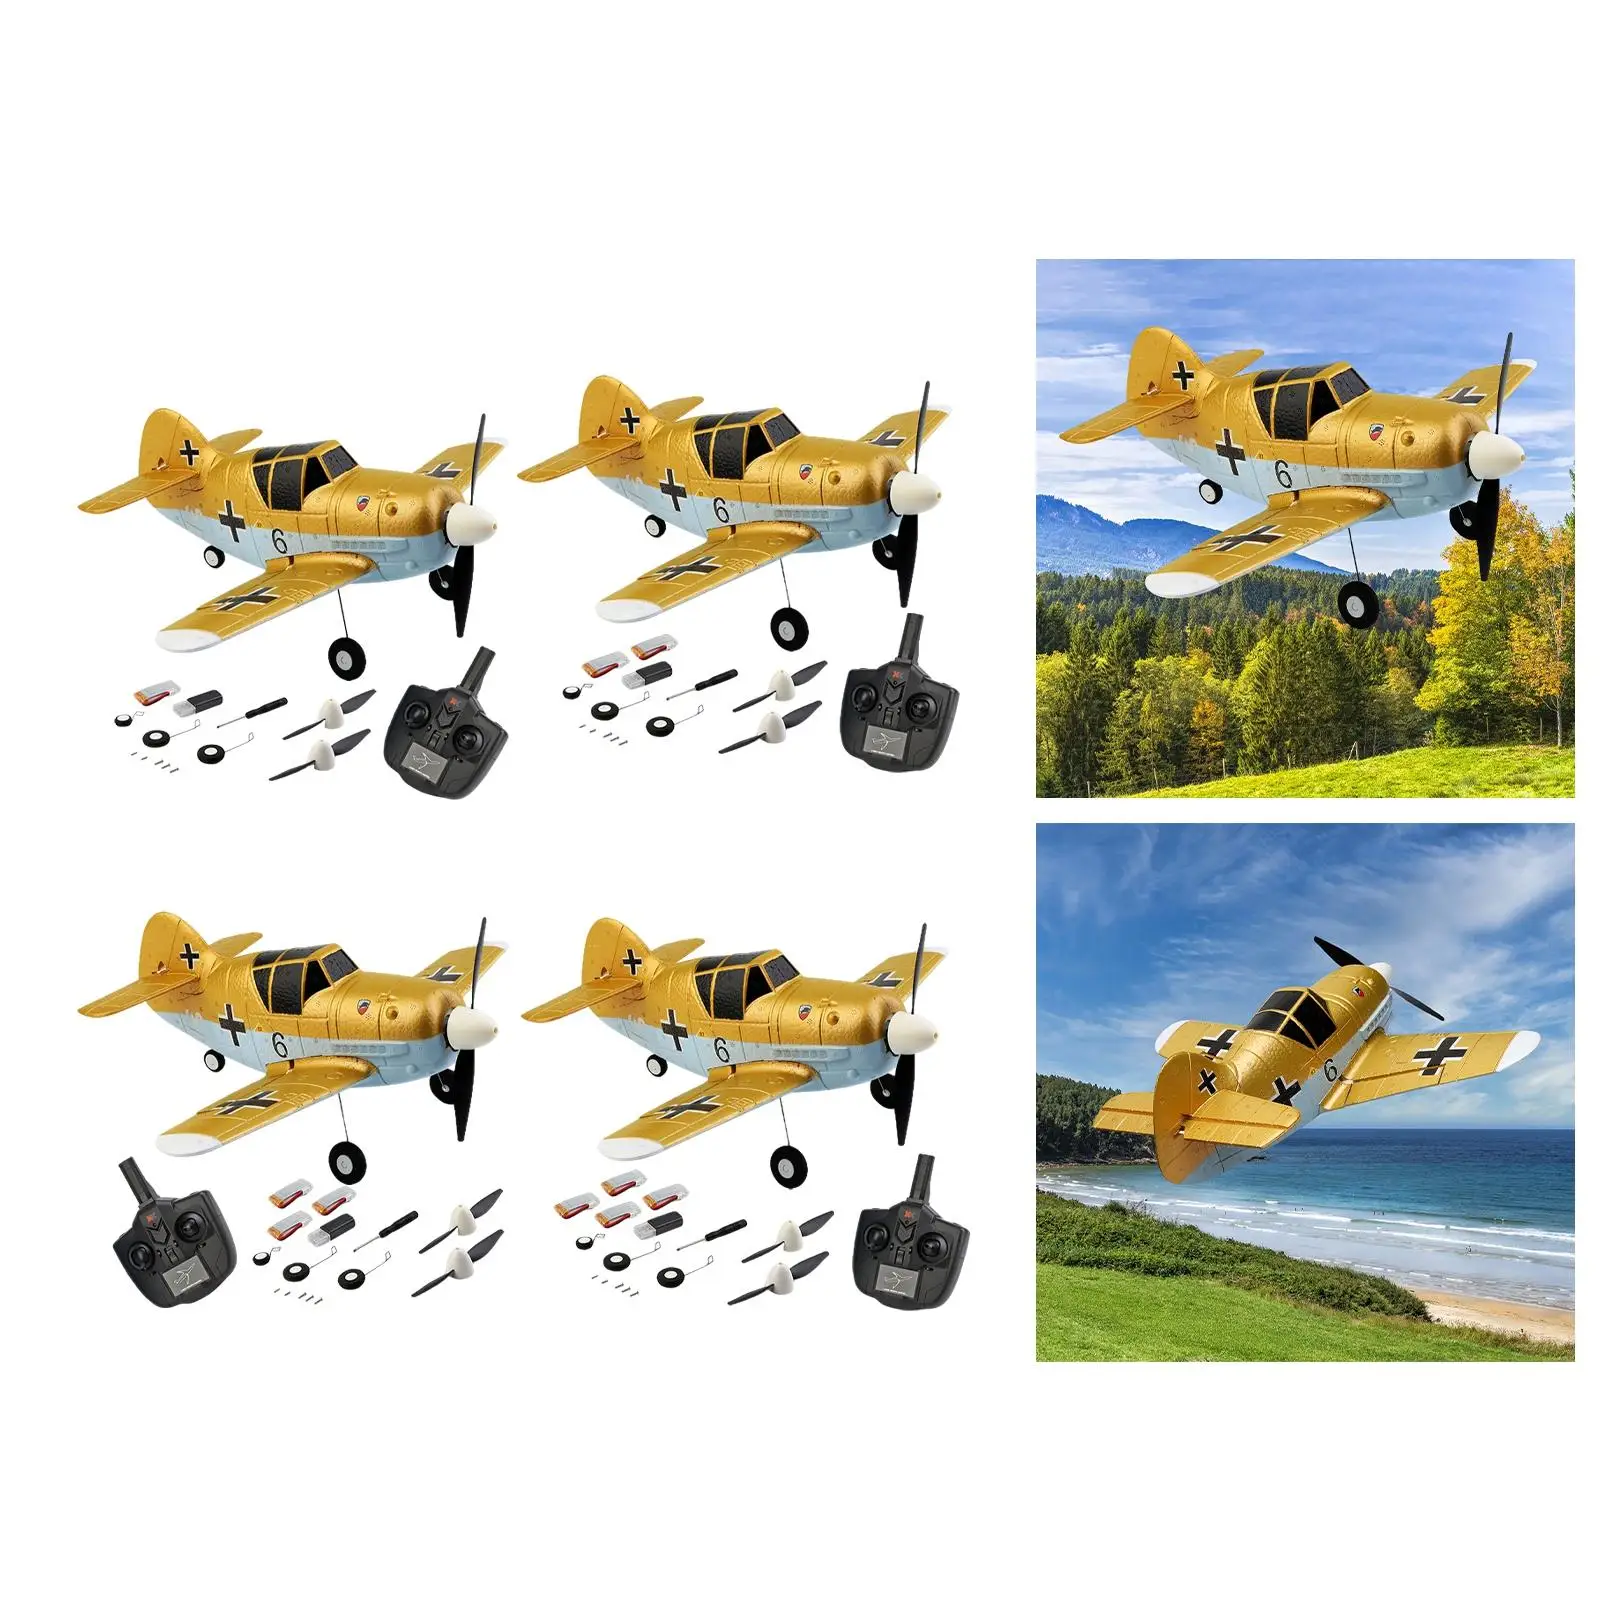 XK A250 2.4G 4 Channel EPP Foam Aircraft Remote Control Smart Balance RC Plane BF-109 Fighter Toy Ready to Fly